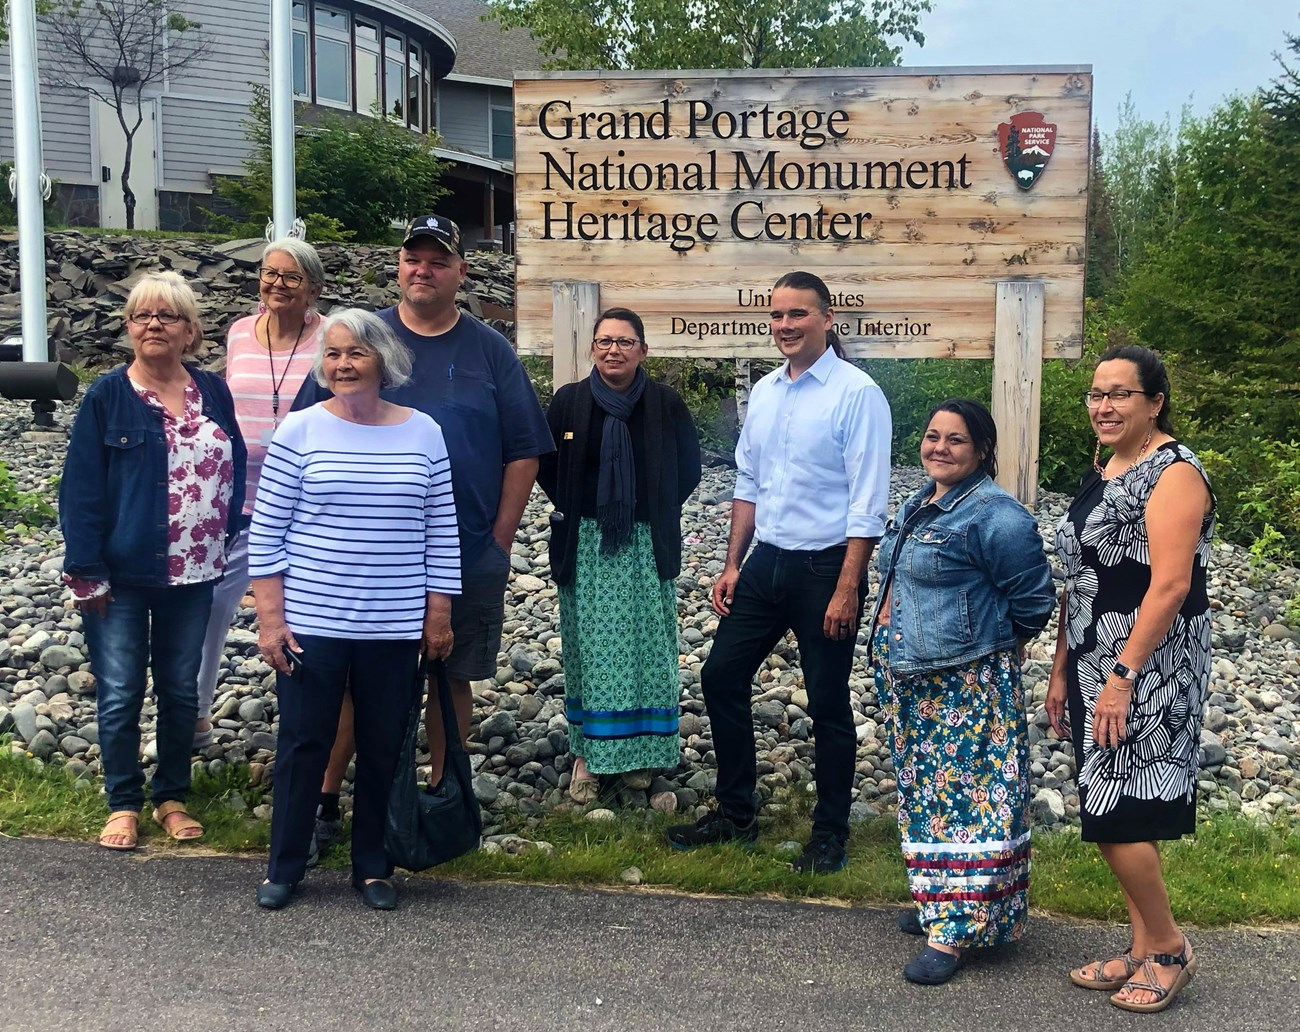 Eight people standing in front of the NPS Grand Portage National Monument sign.